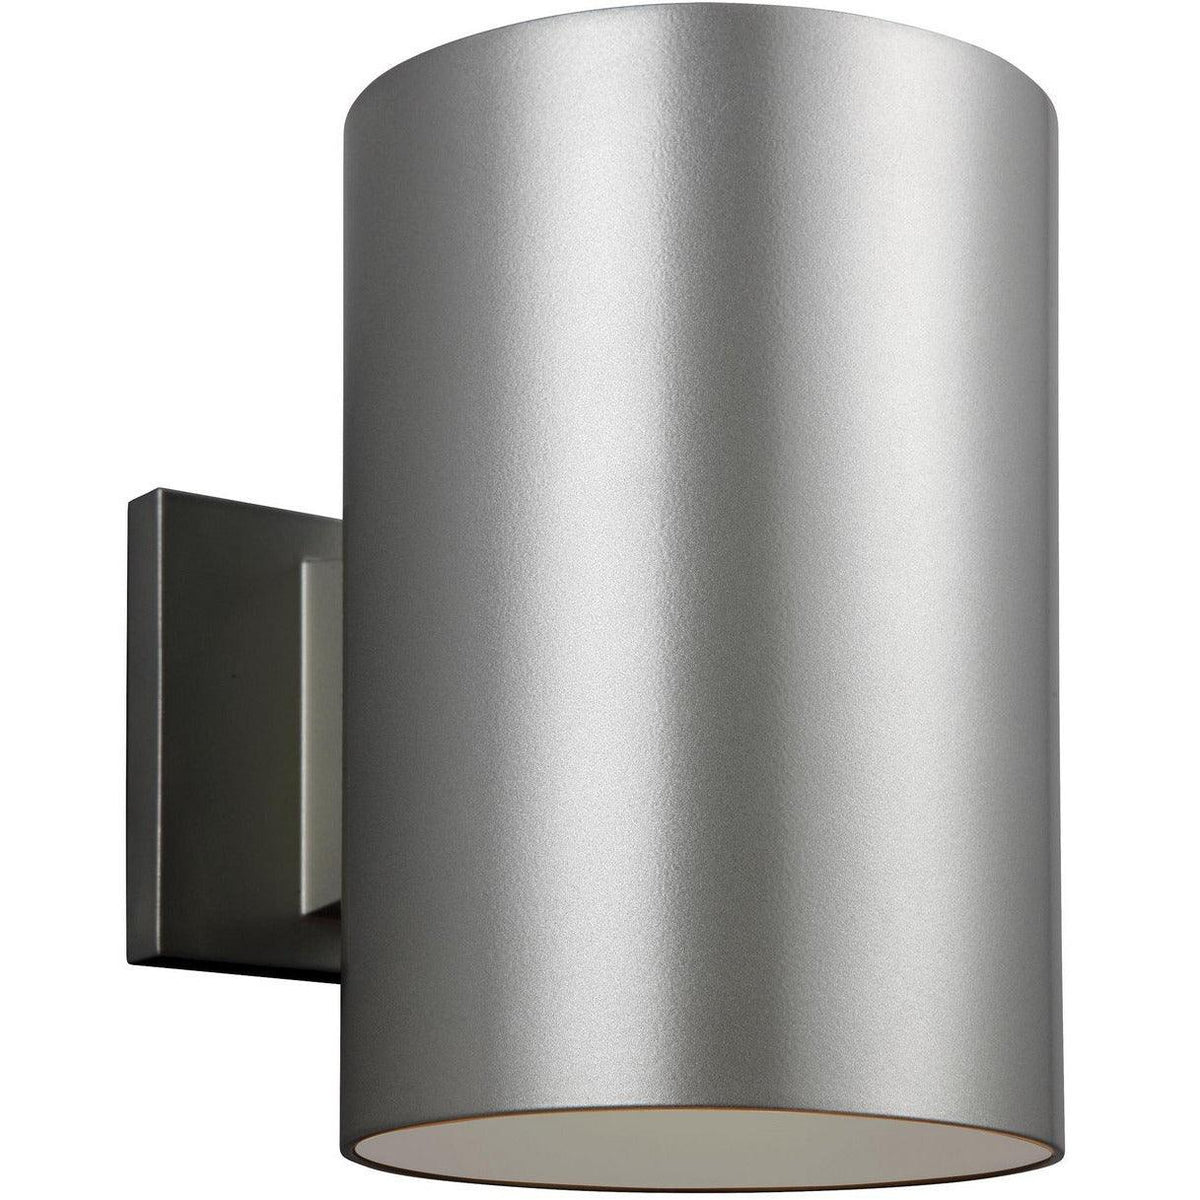 Generation Lighting - Outdoor Cylinders LED Outdoor Wall Sconce - 8313997S-753 | Montreal Lighting & Hardware